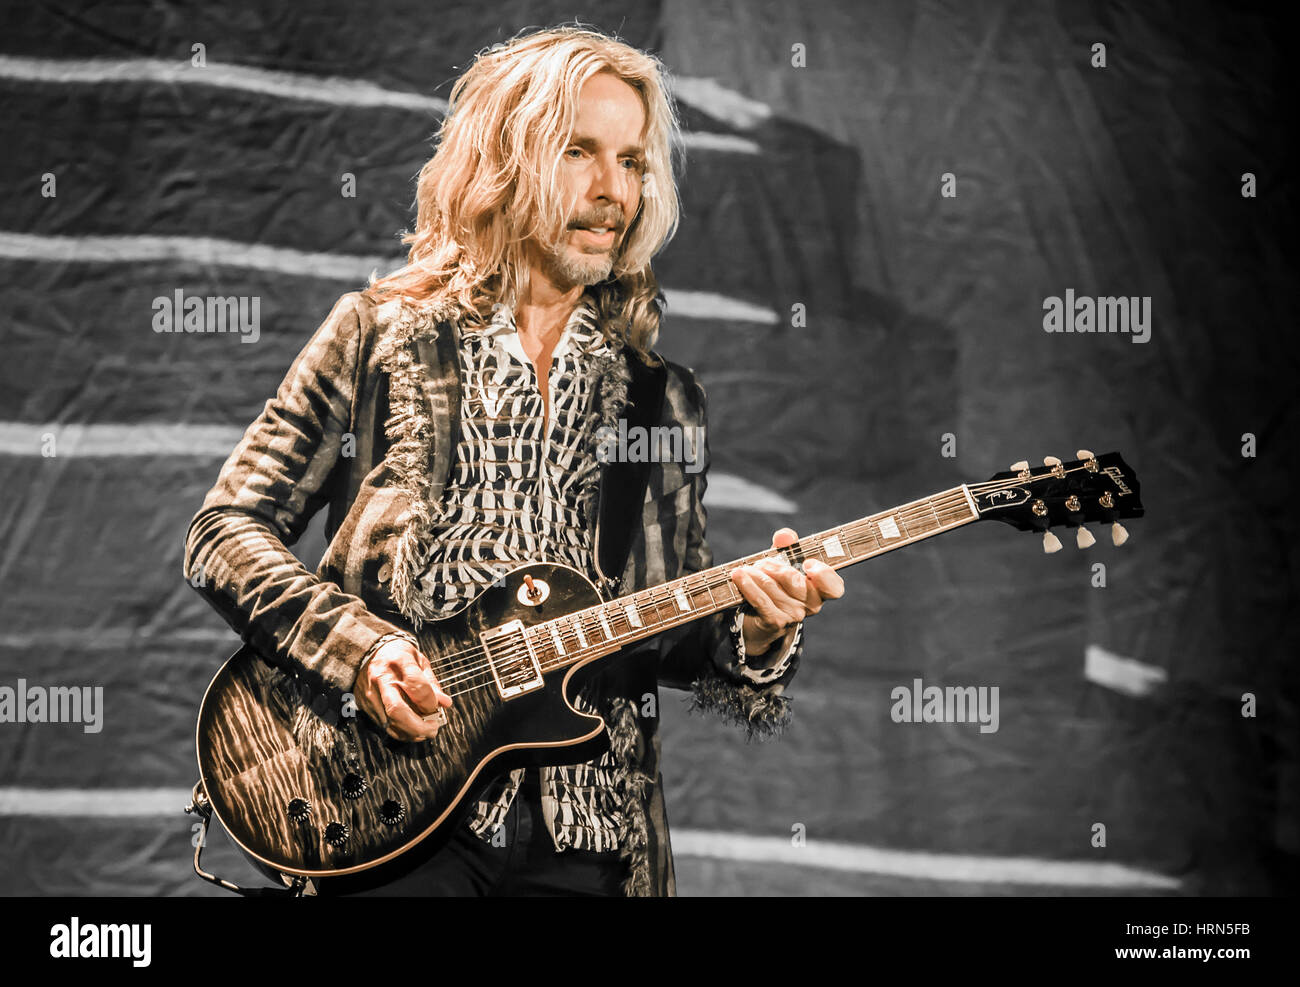 Costa Mesa, California, USA. 15th June, 2016. TOMMY SHAW Guitar for Styx 2016 Tour plays at the Pacific Amphitheater to a near sold out show. Credit: Dave Safley/ZUMA Wire/Alamy Live News Stock Photo